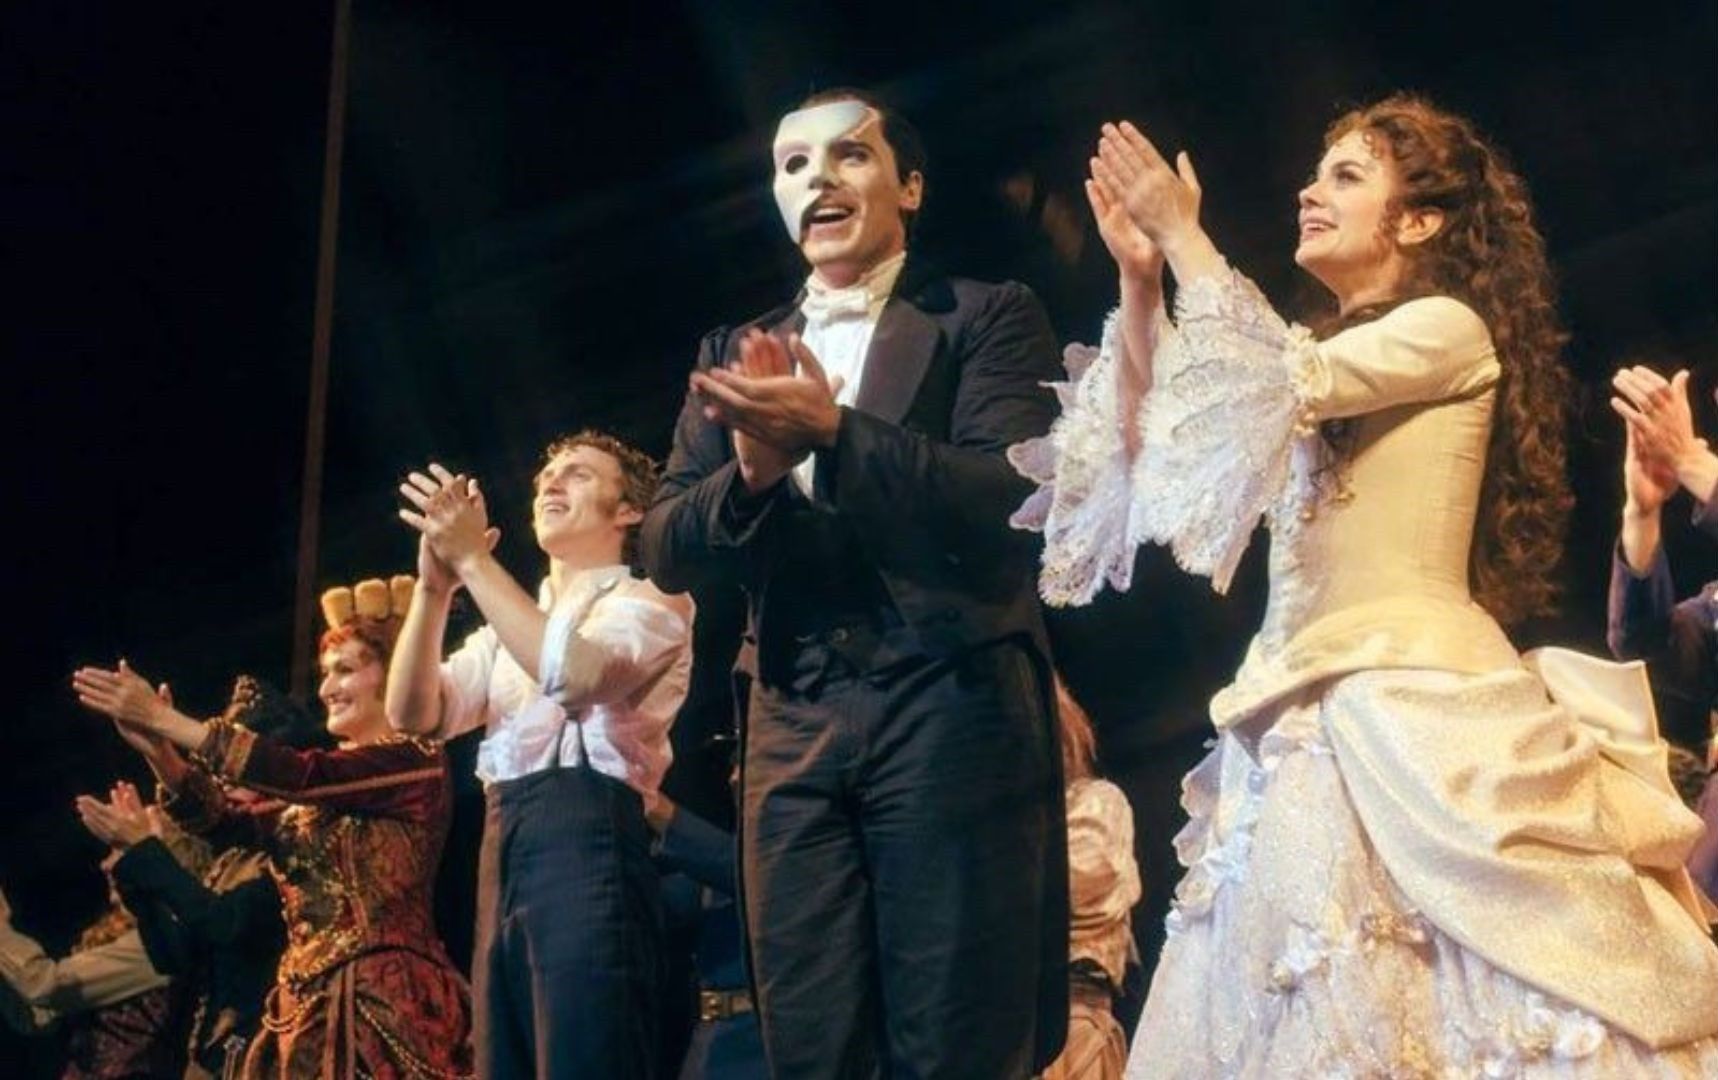 'The Phantom of the Opera' to close on Broadway after 35 years